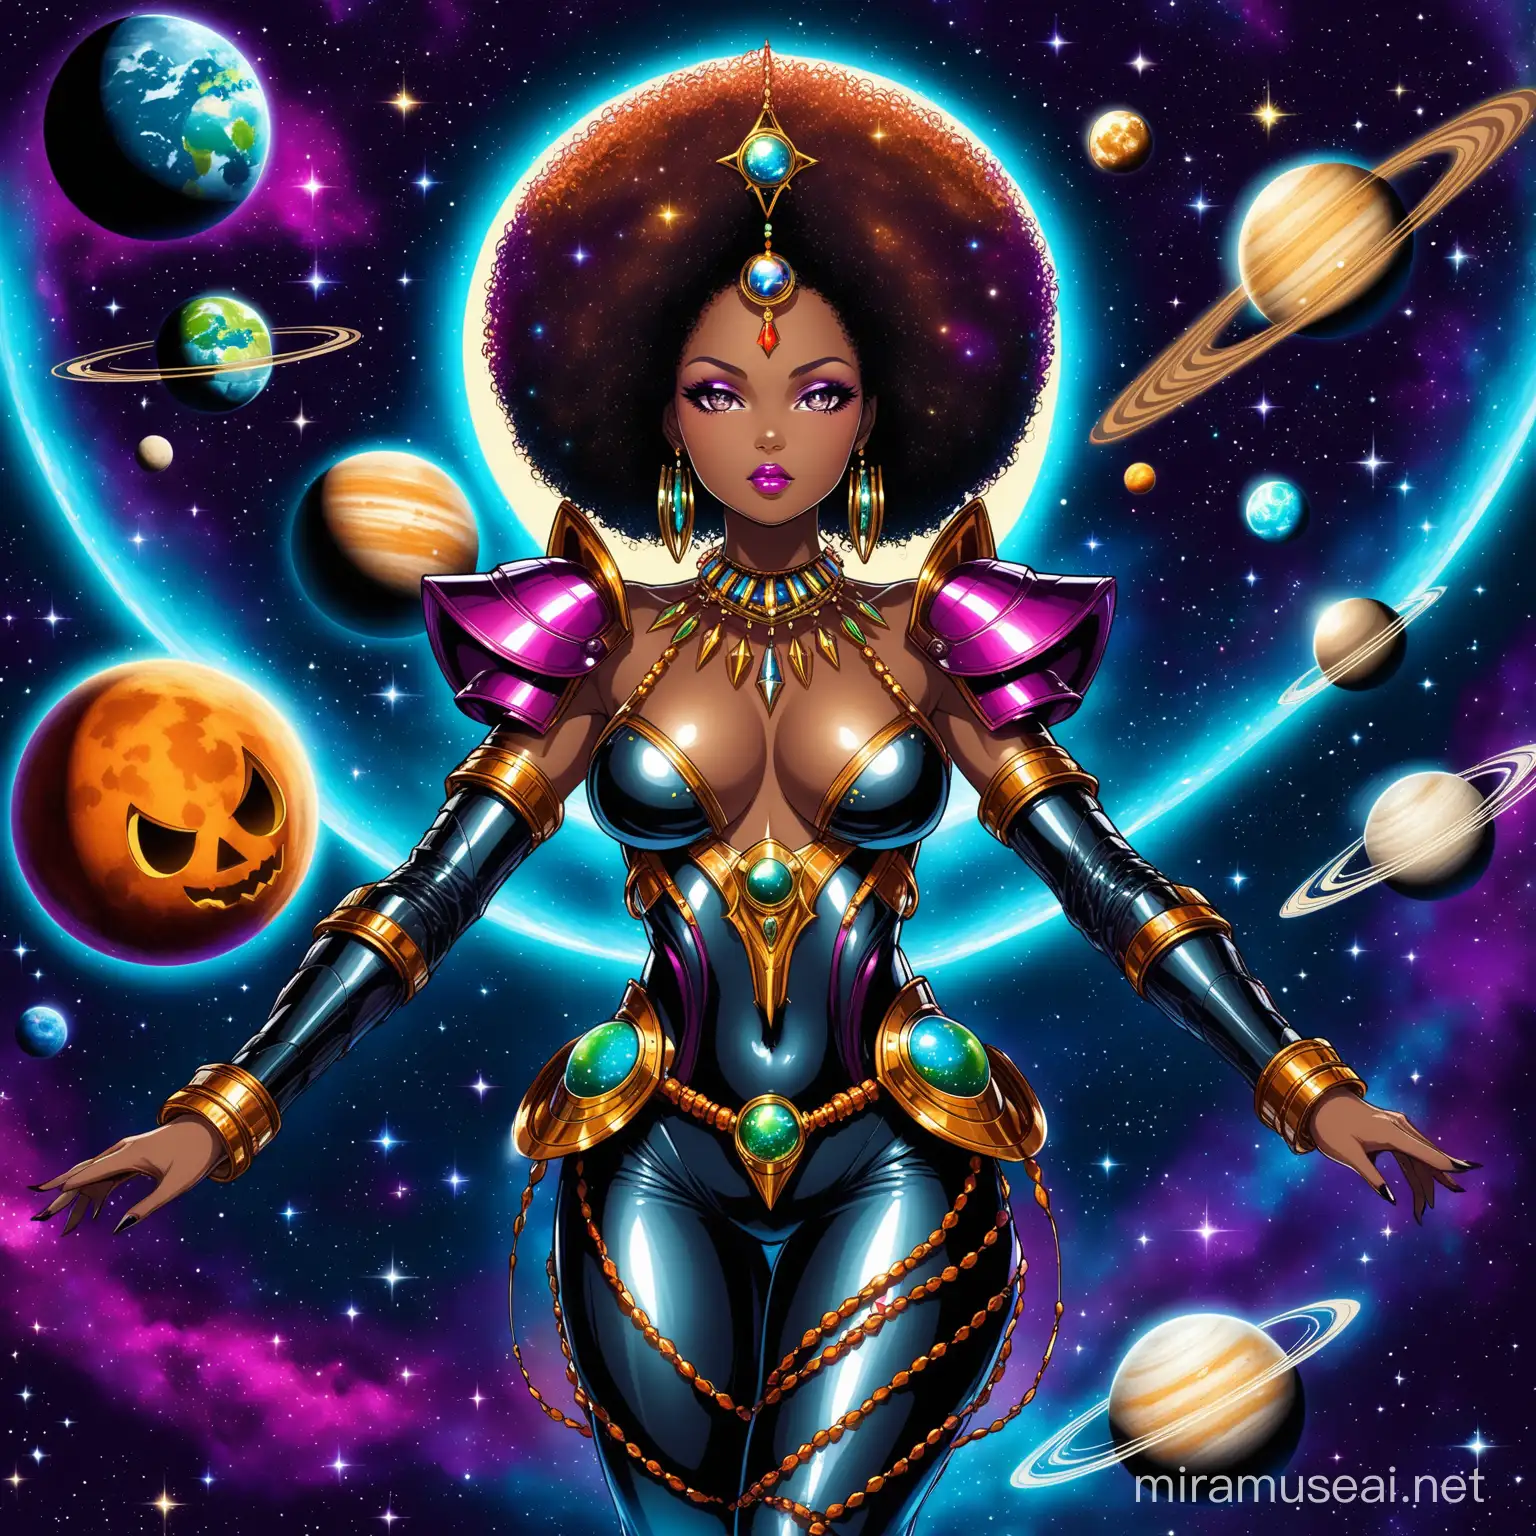 Cosmic Queen AfroFuturistic Lady adorned with African Jewelry in Spooky Halloween Atmosphere